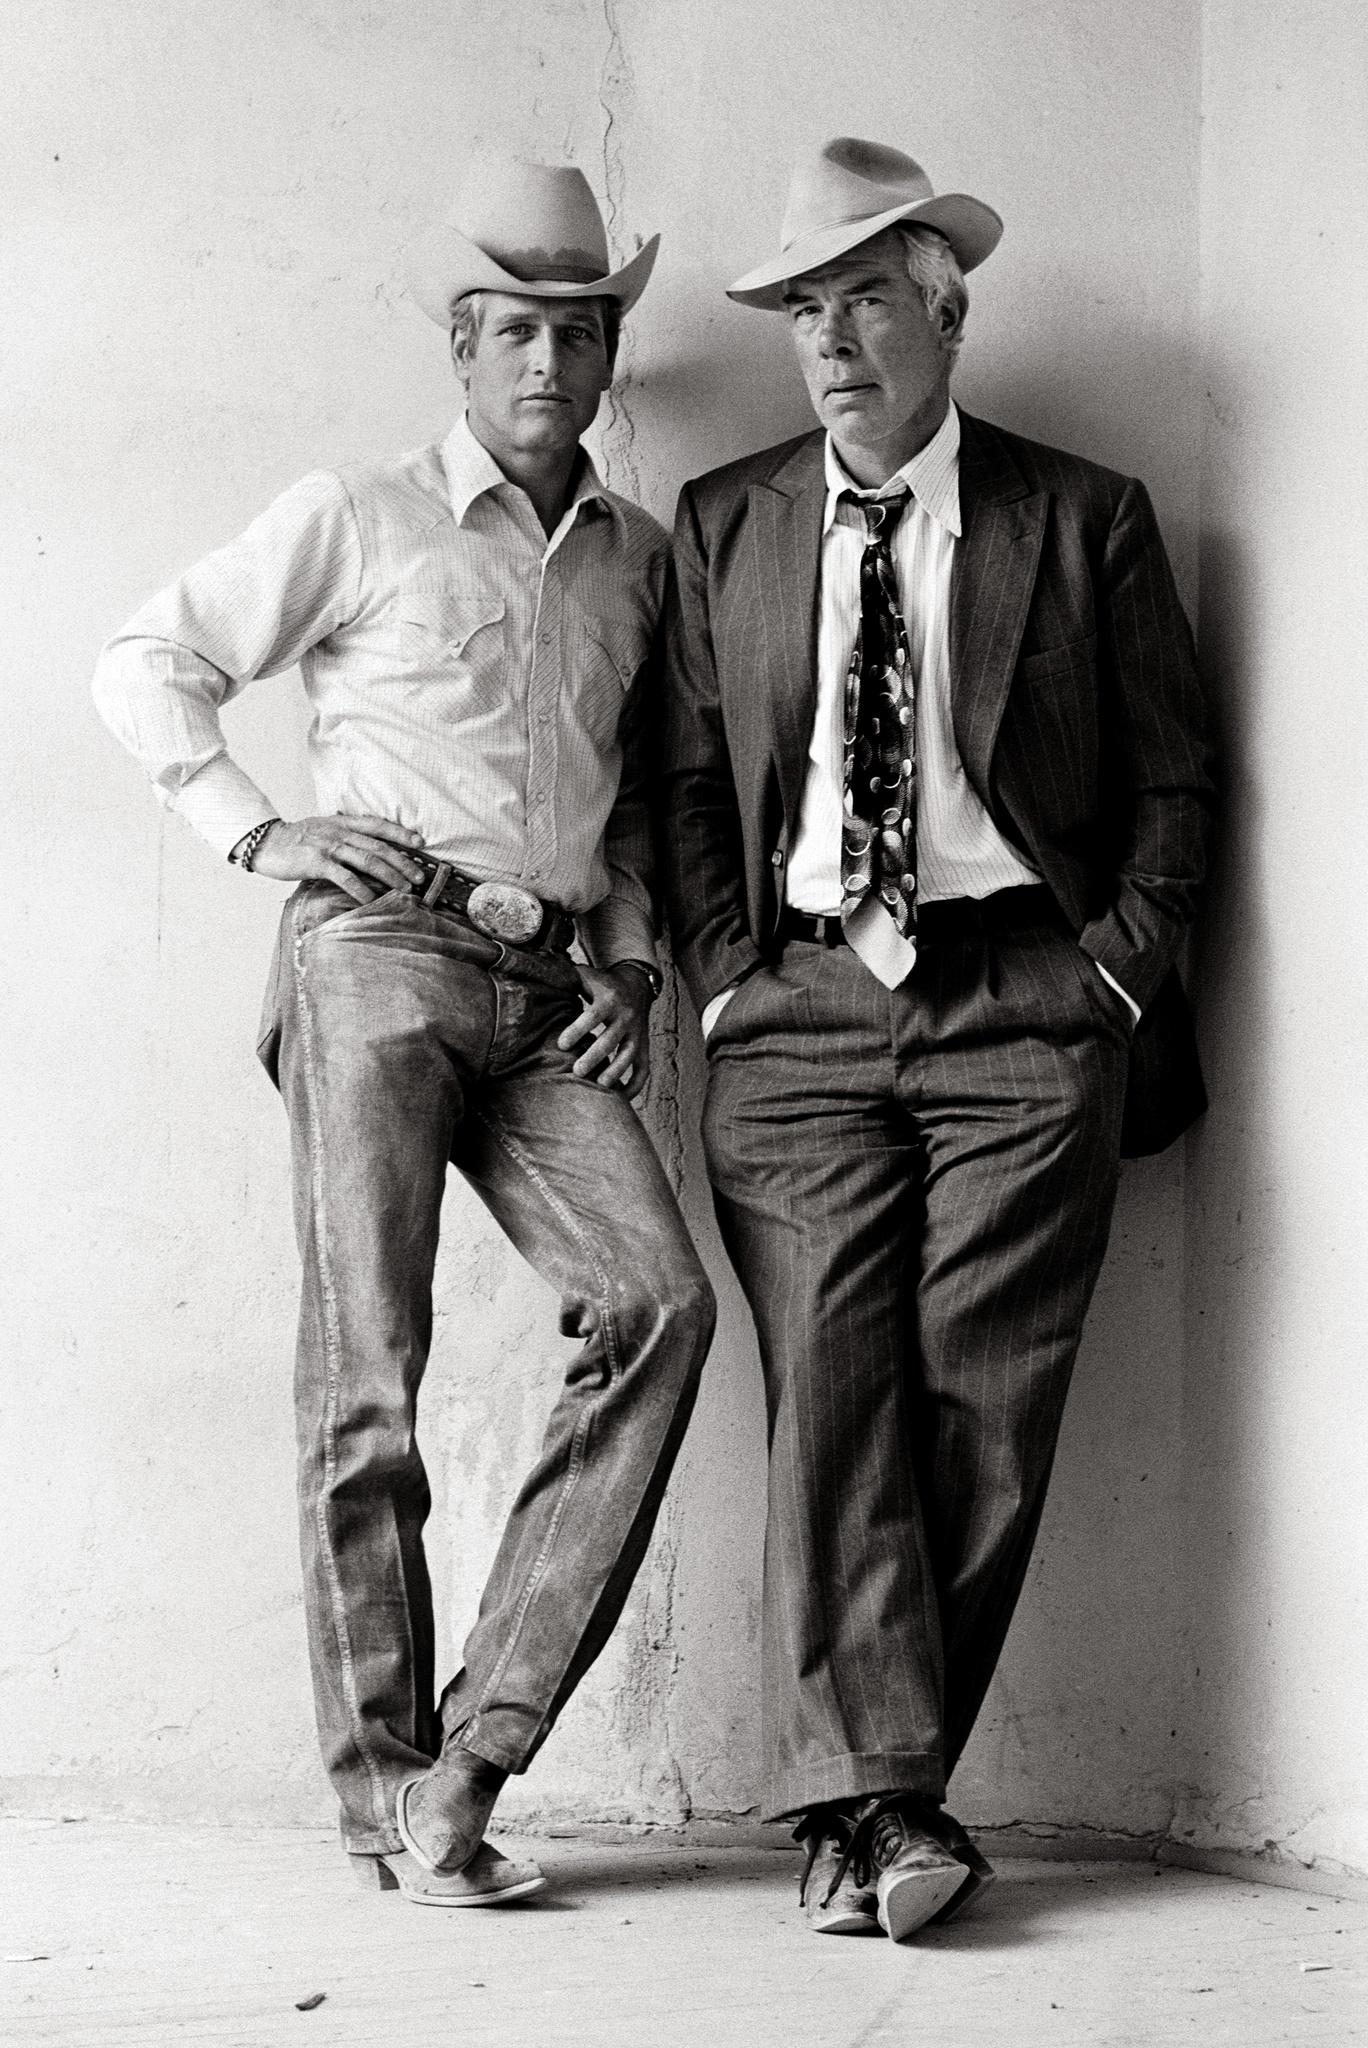 Paul Newman and Lee Marvin, 1972 - Terry O'Neill (Portrait Photography)
Signed and numbered
Silver gelatin print

Available in the following sizes:
12 x 16 inches, edition of 50 + 10 APs
16 x 20 inches, edition of 50 + 10 APs
20 x 24 inches, edition